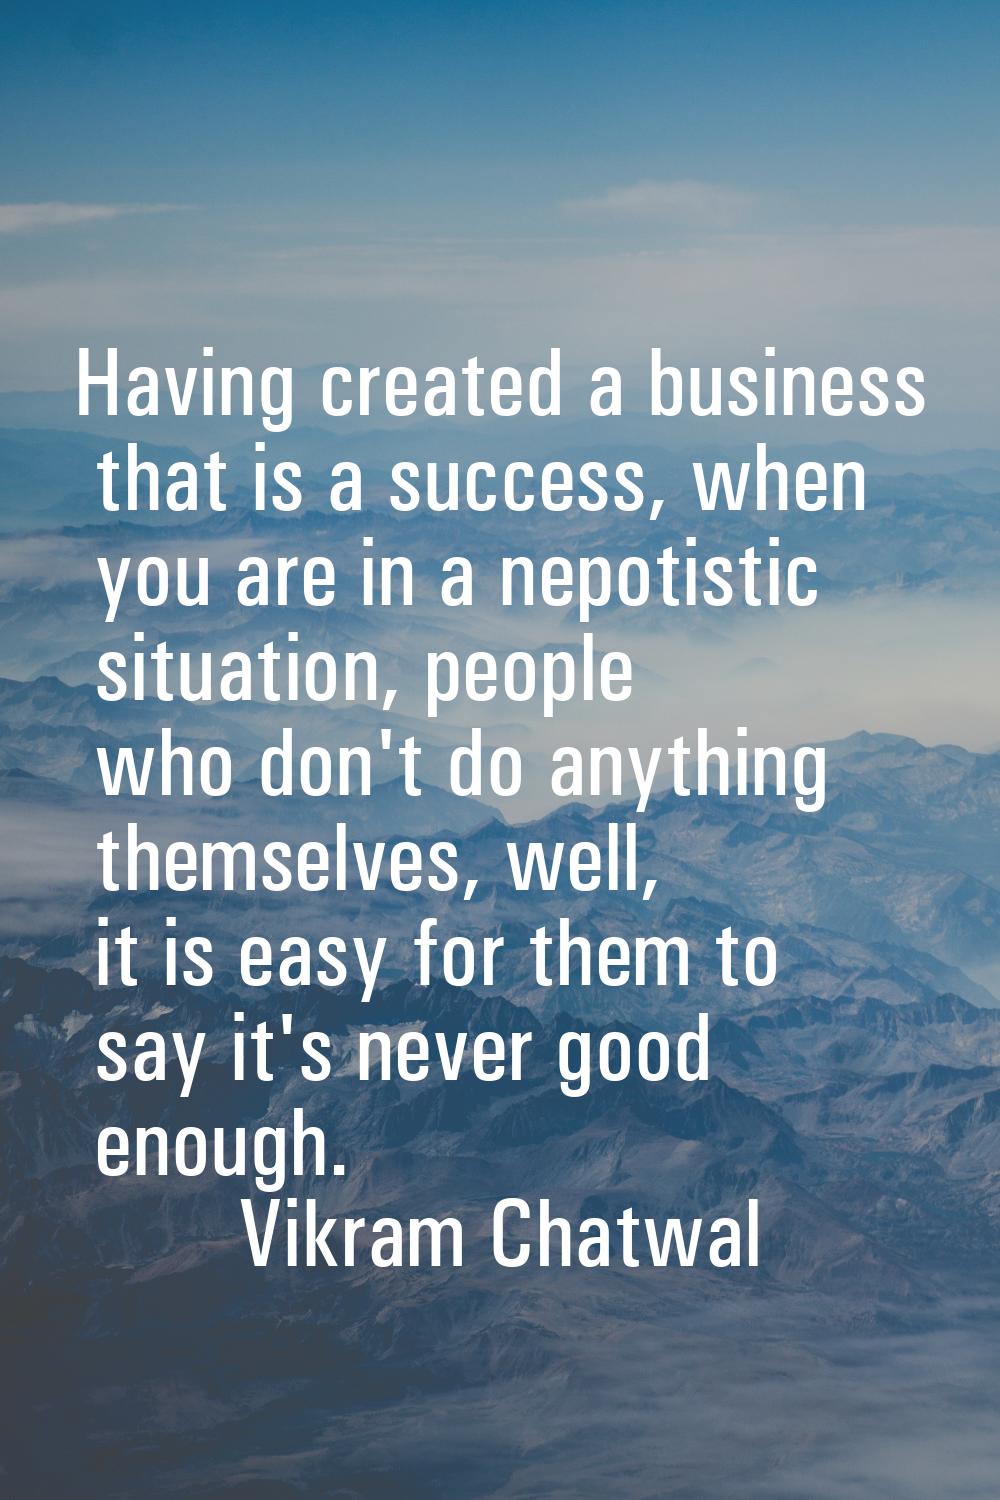 Having created a business that is a success, when you are in a nepotistic situation, people who don